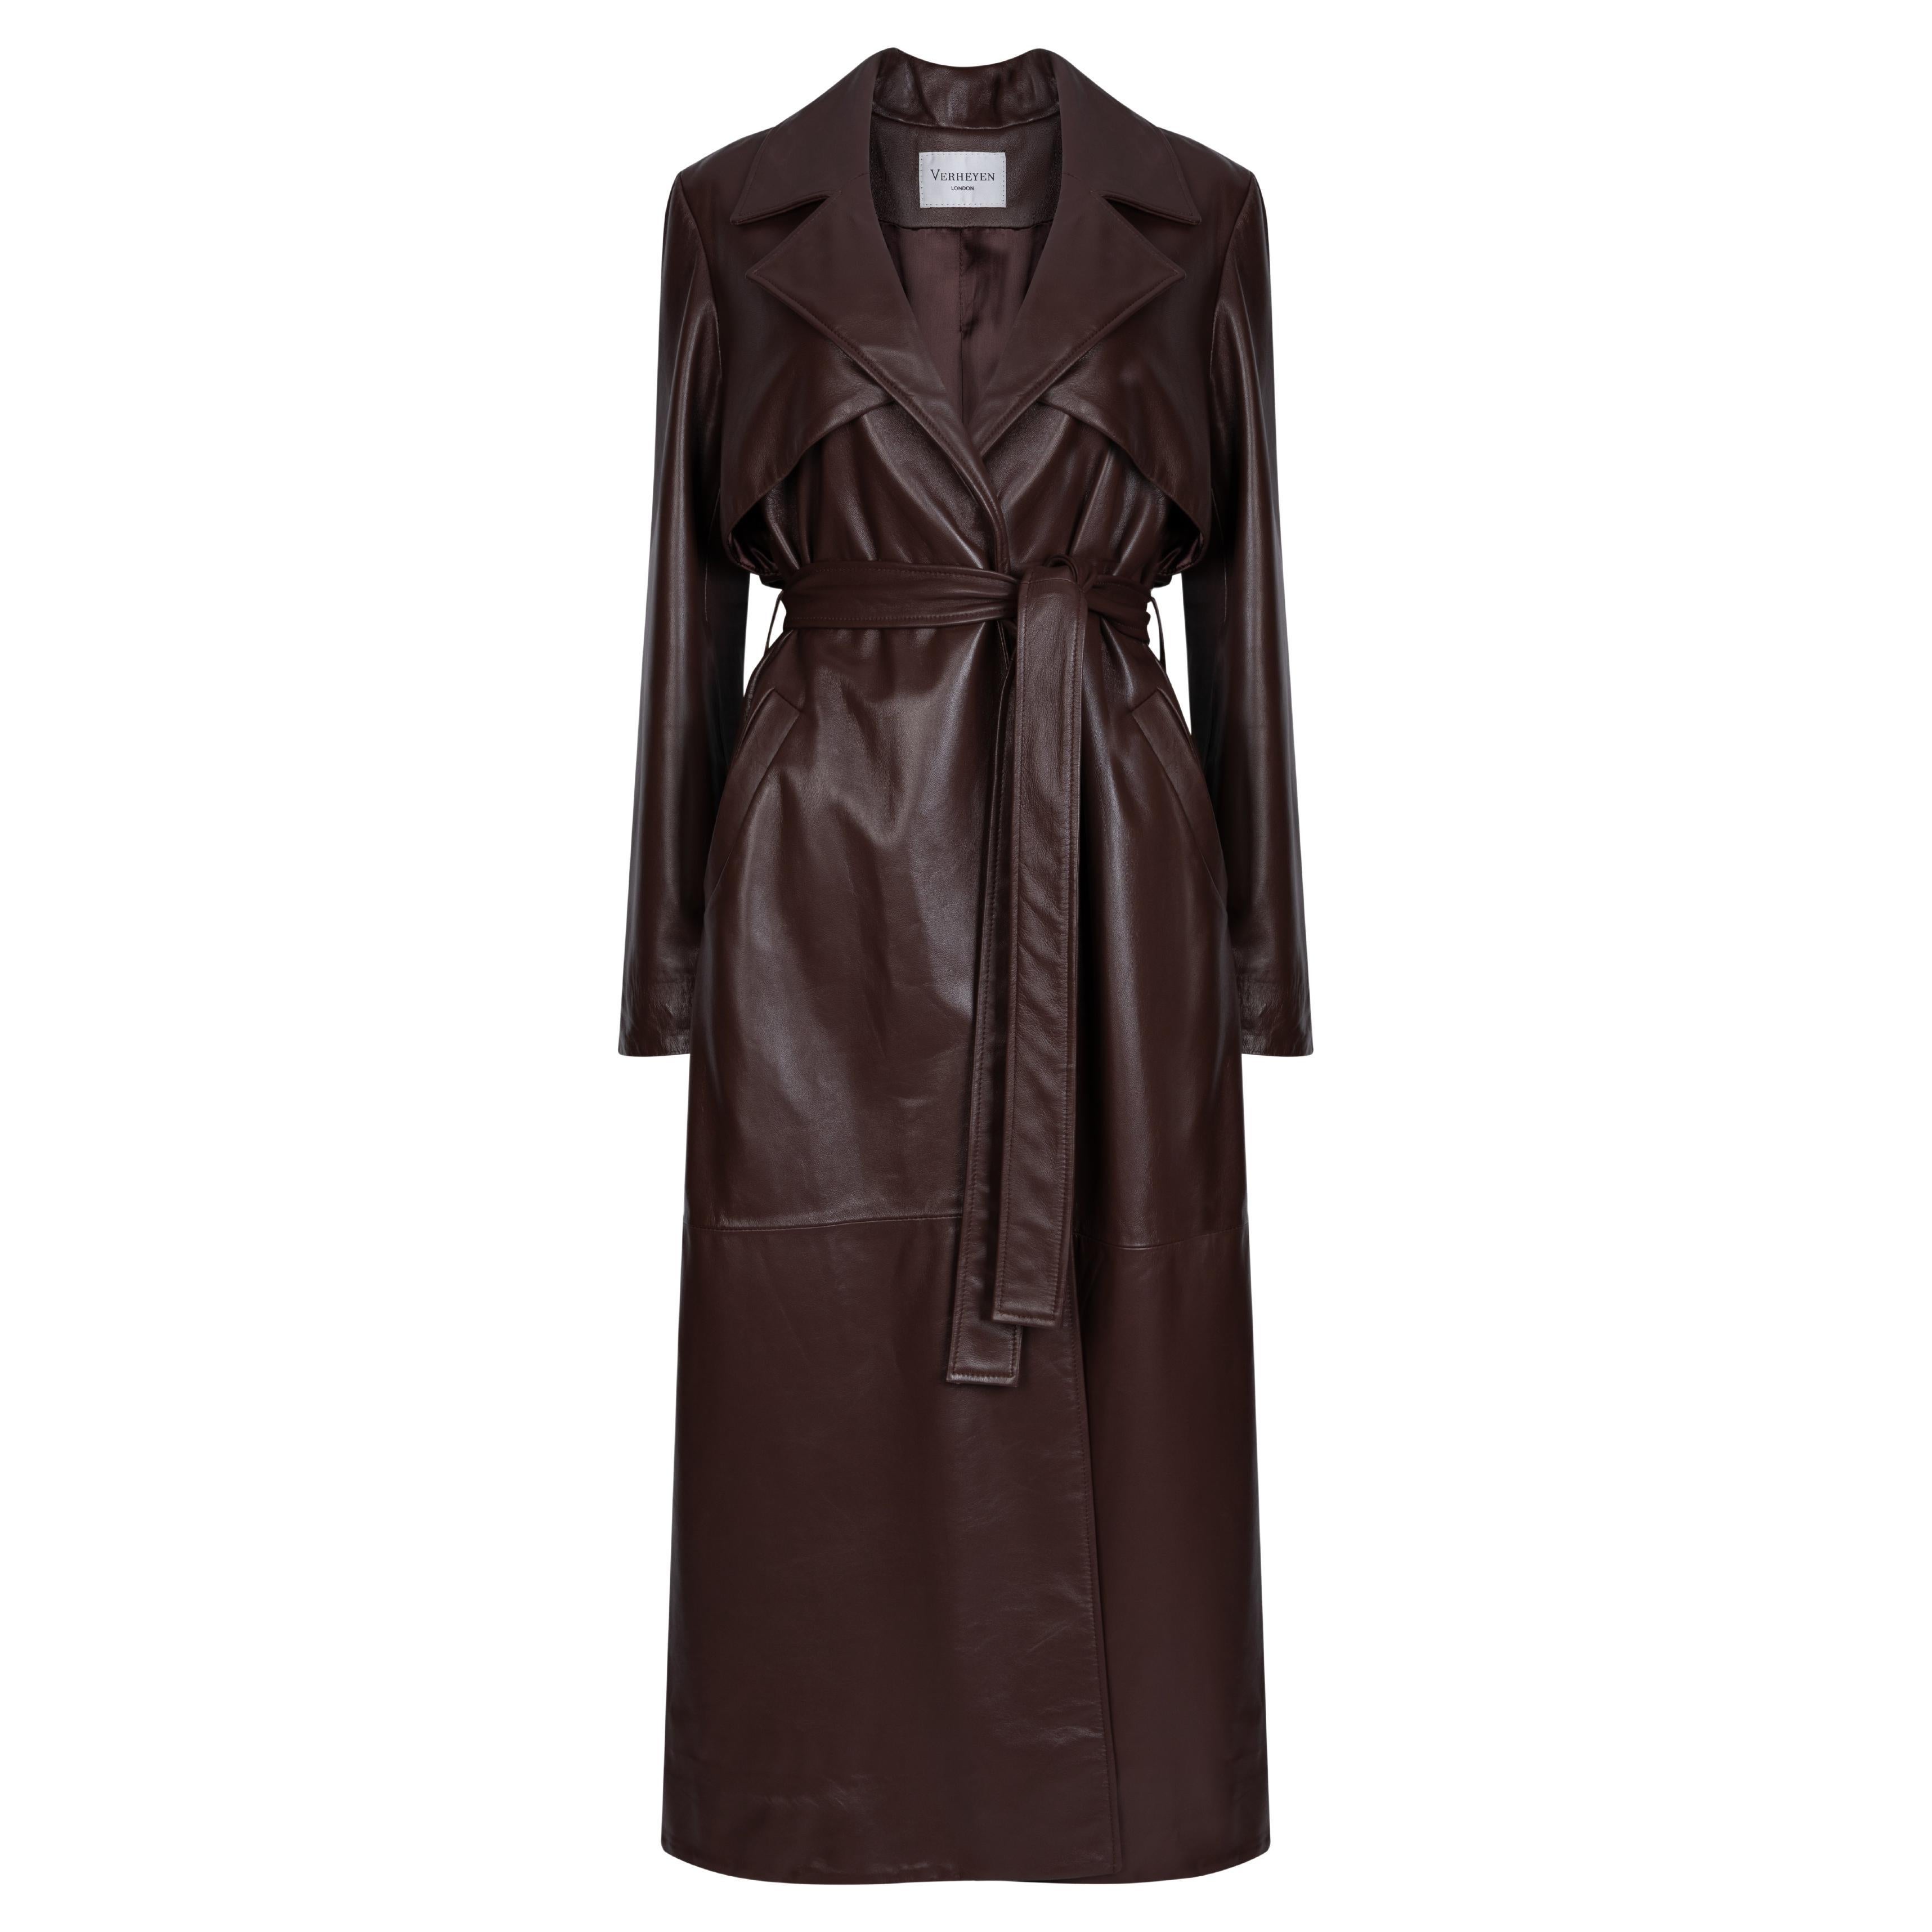 Verheyen London Leather Trench Coat in Chocolate Brown - Size uk 8  For Sale